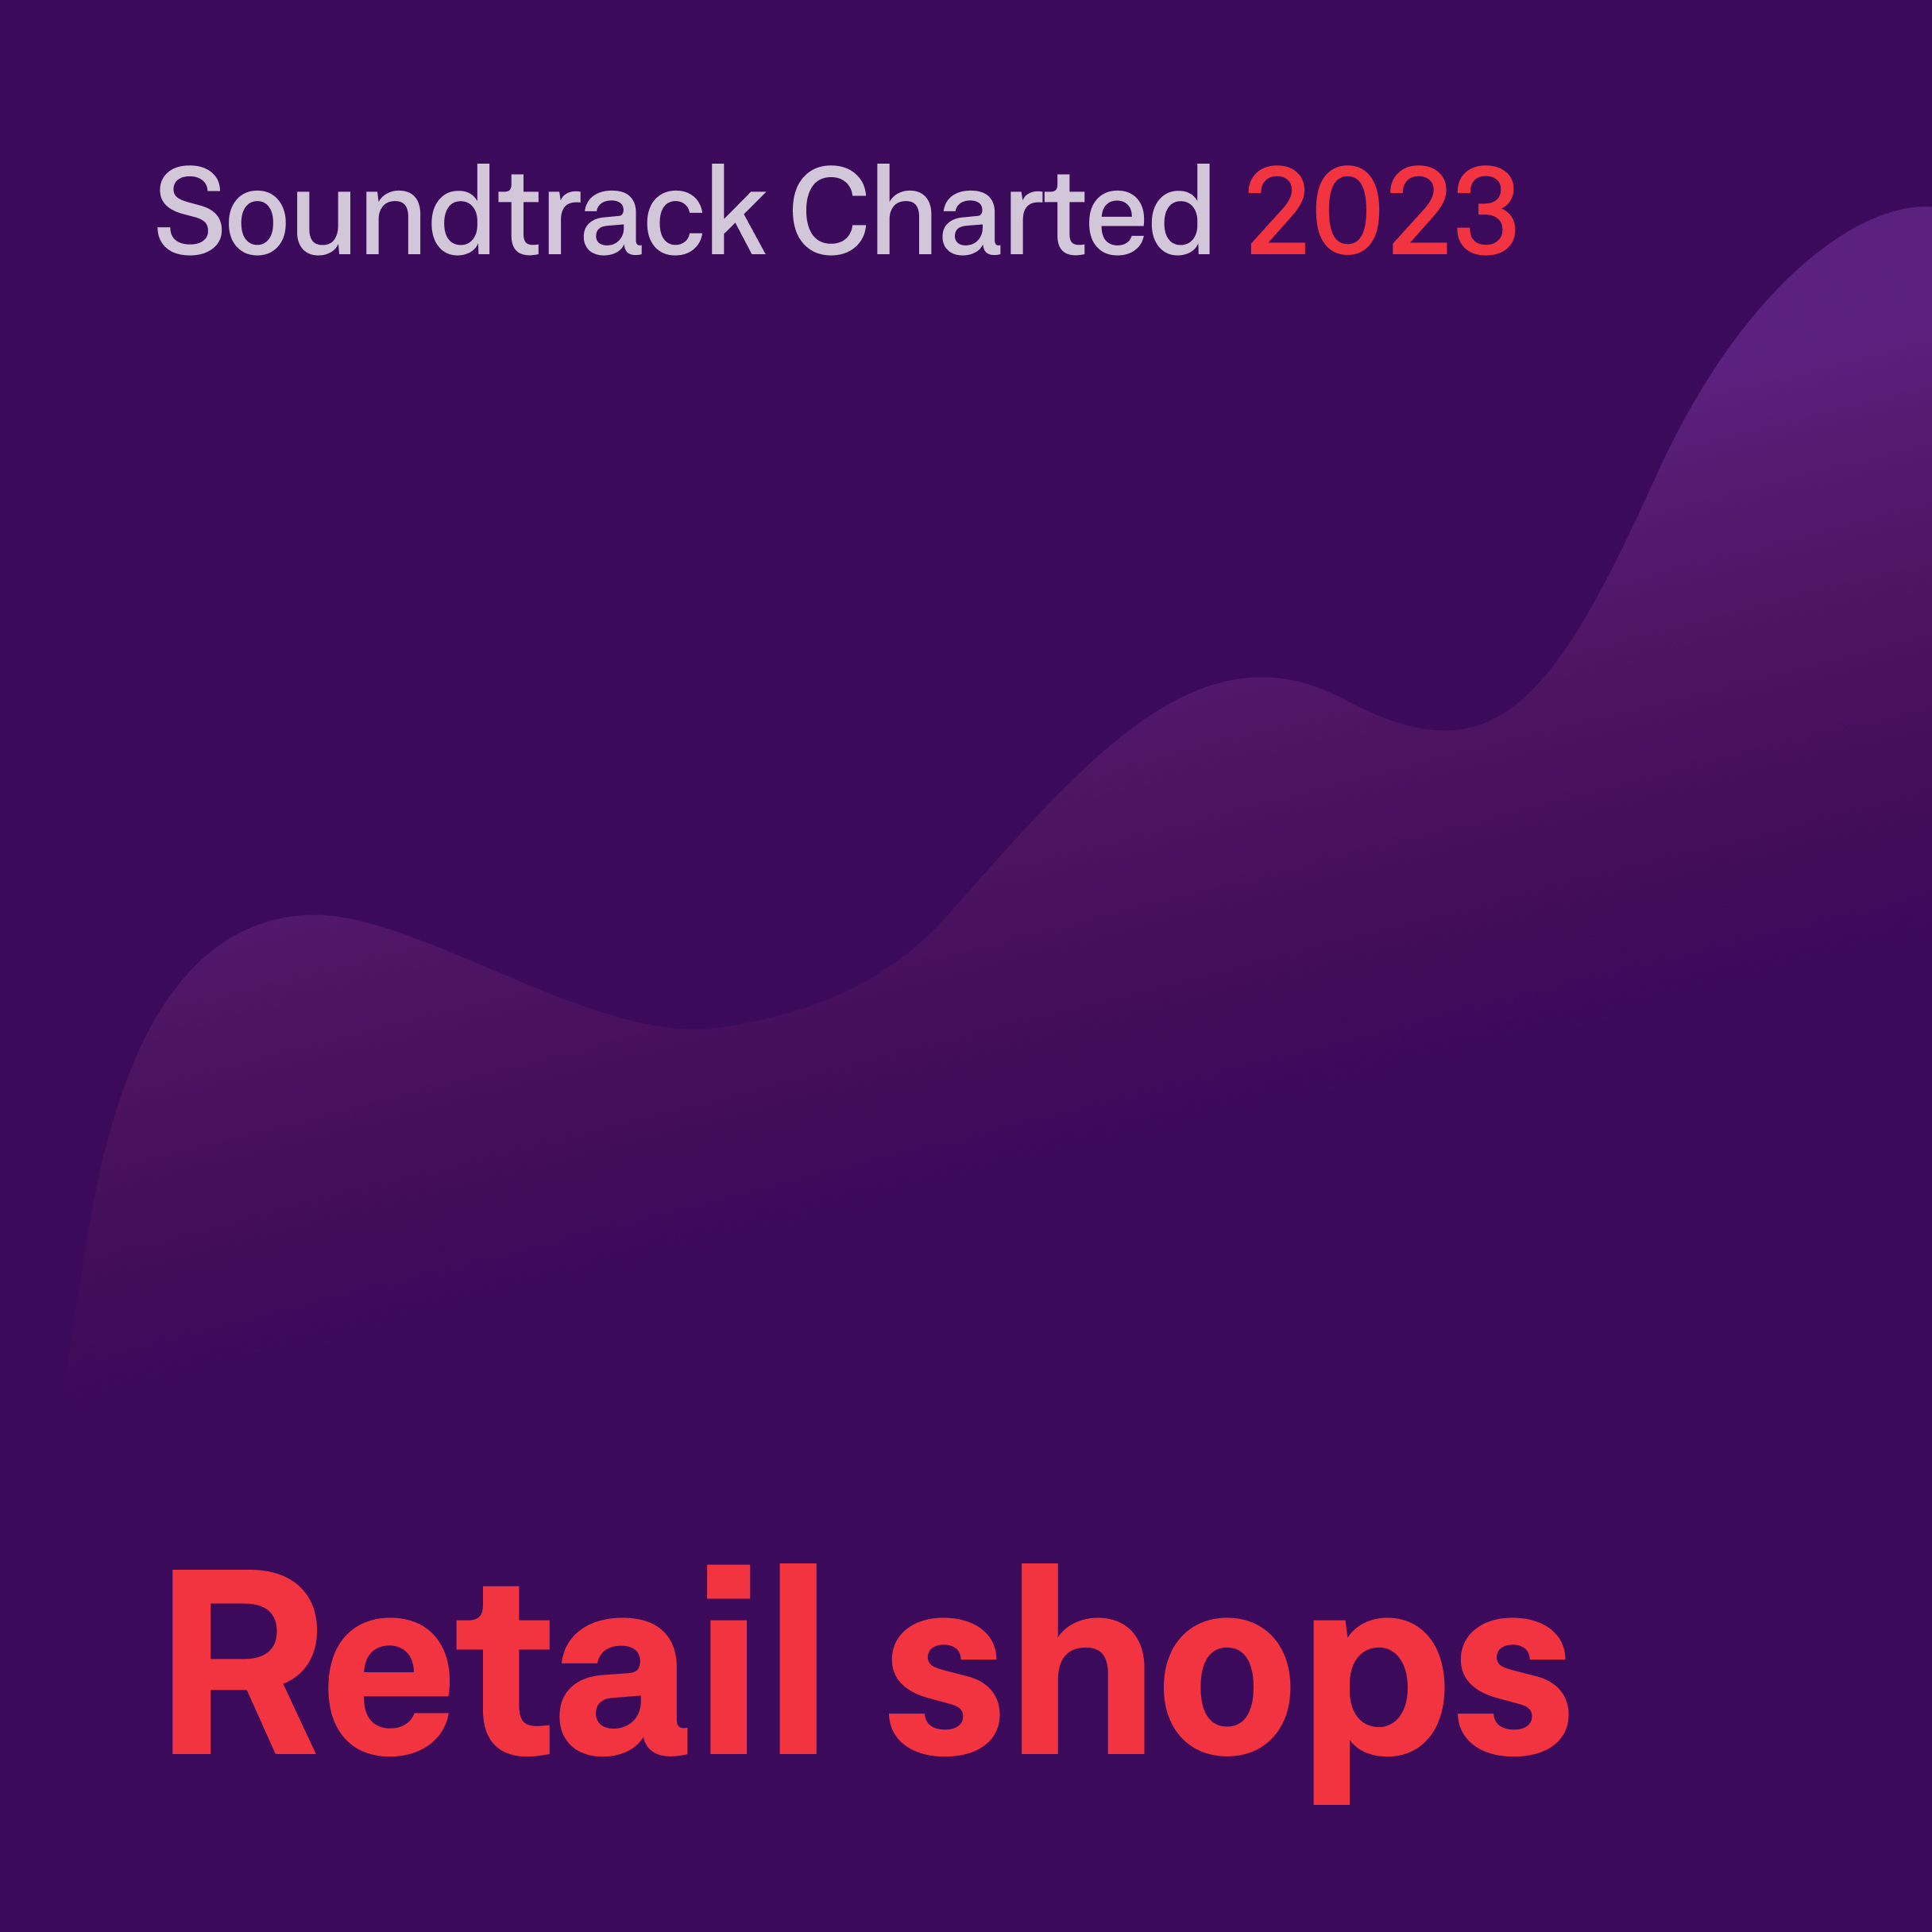 Soundtrack Charted 2023 - retail shops